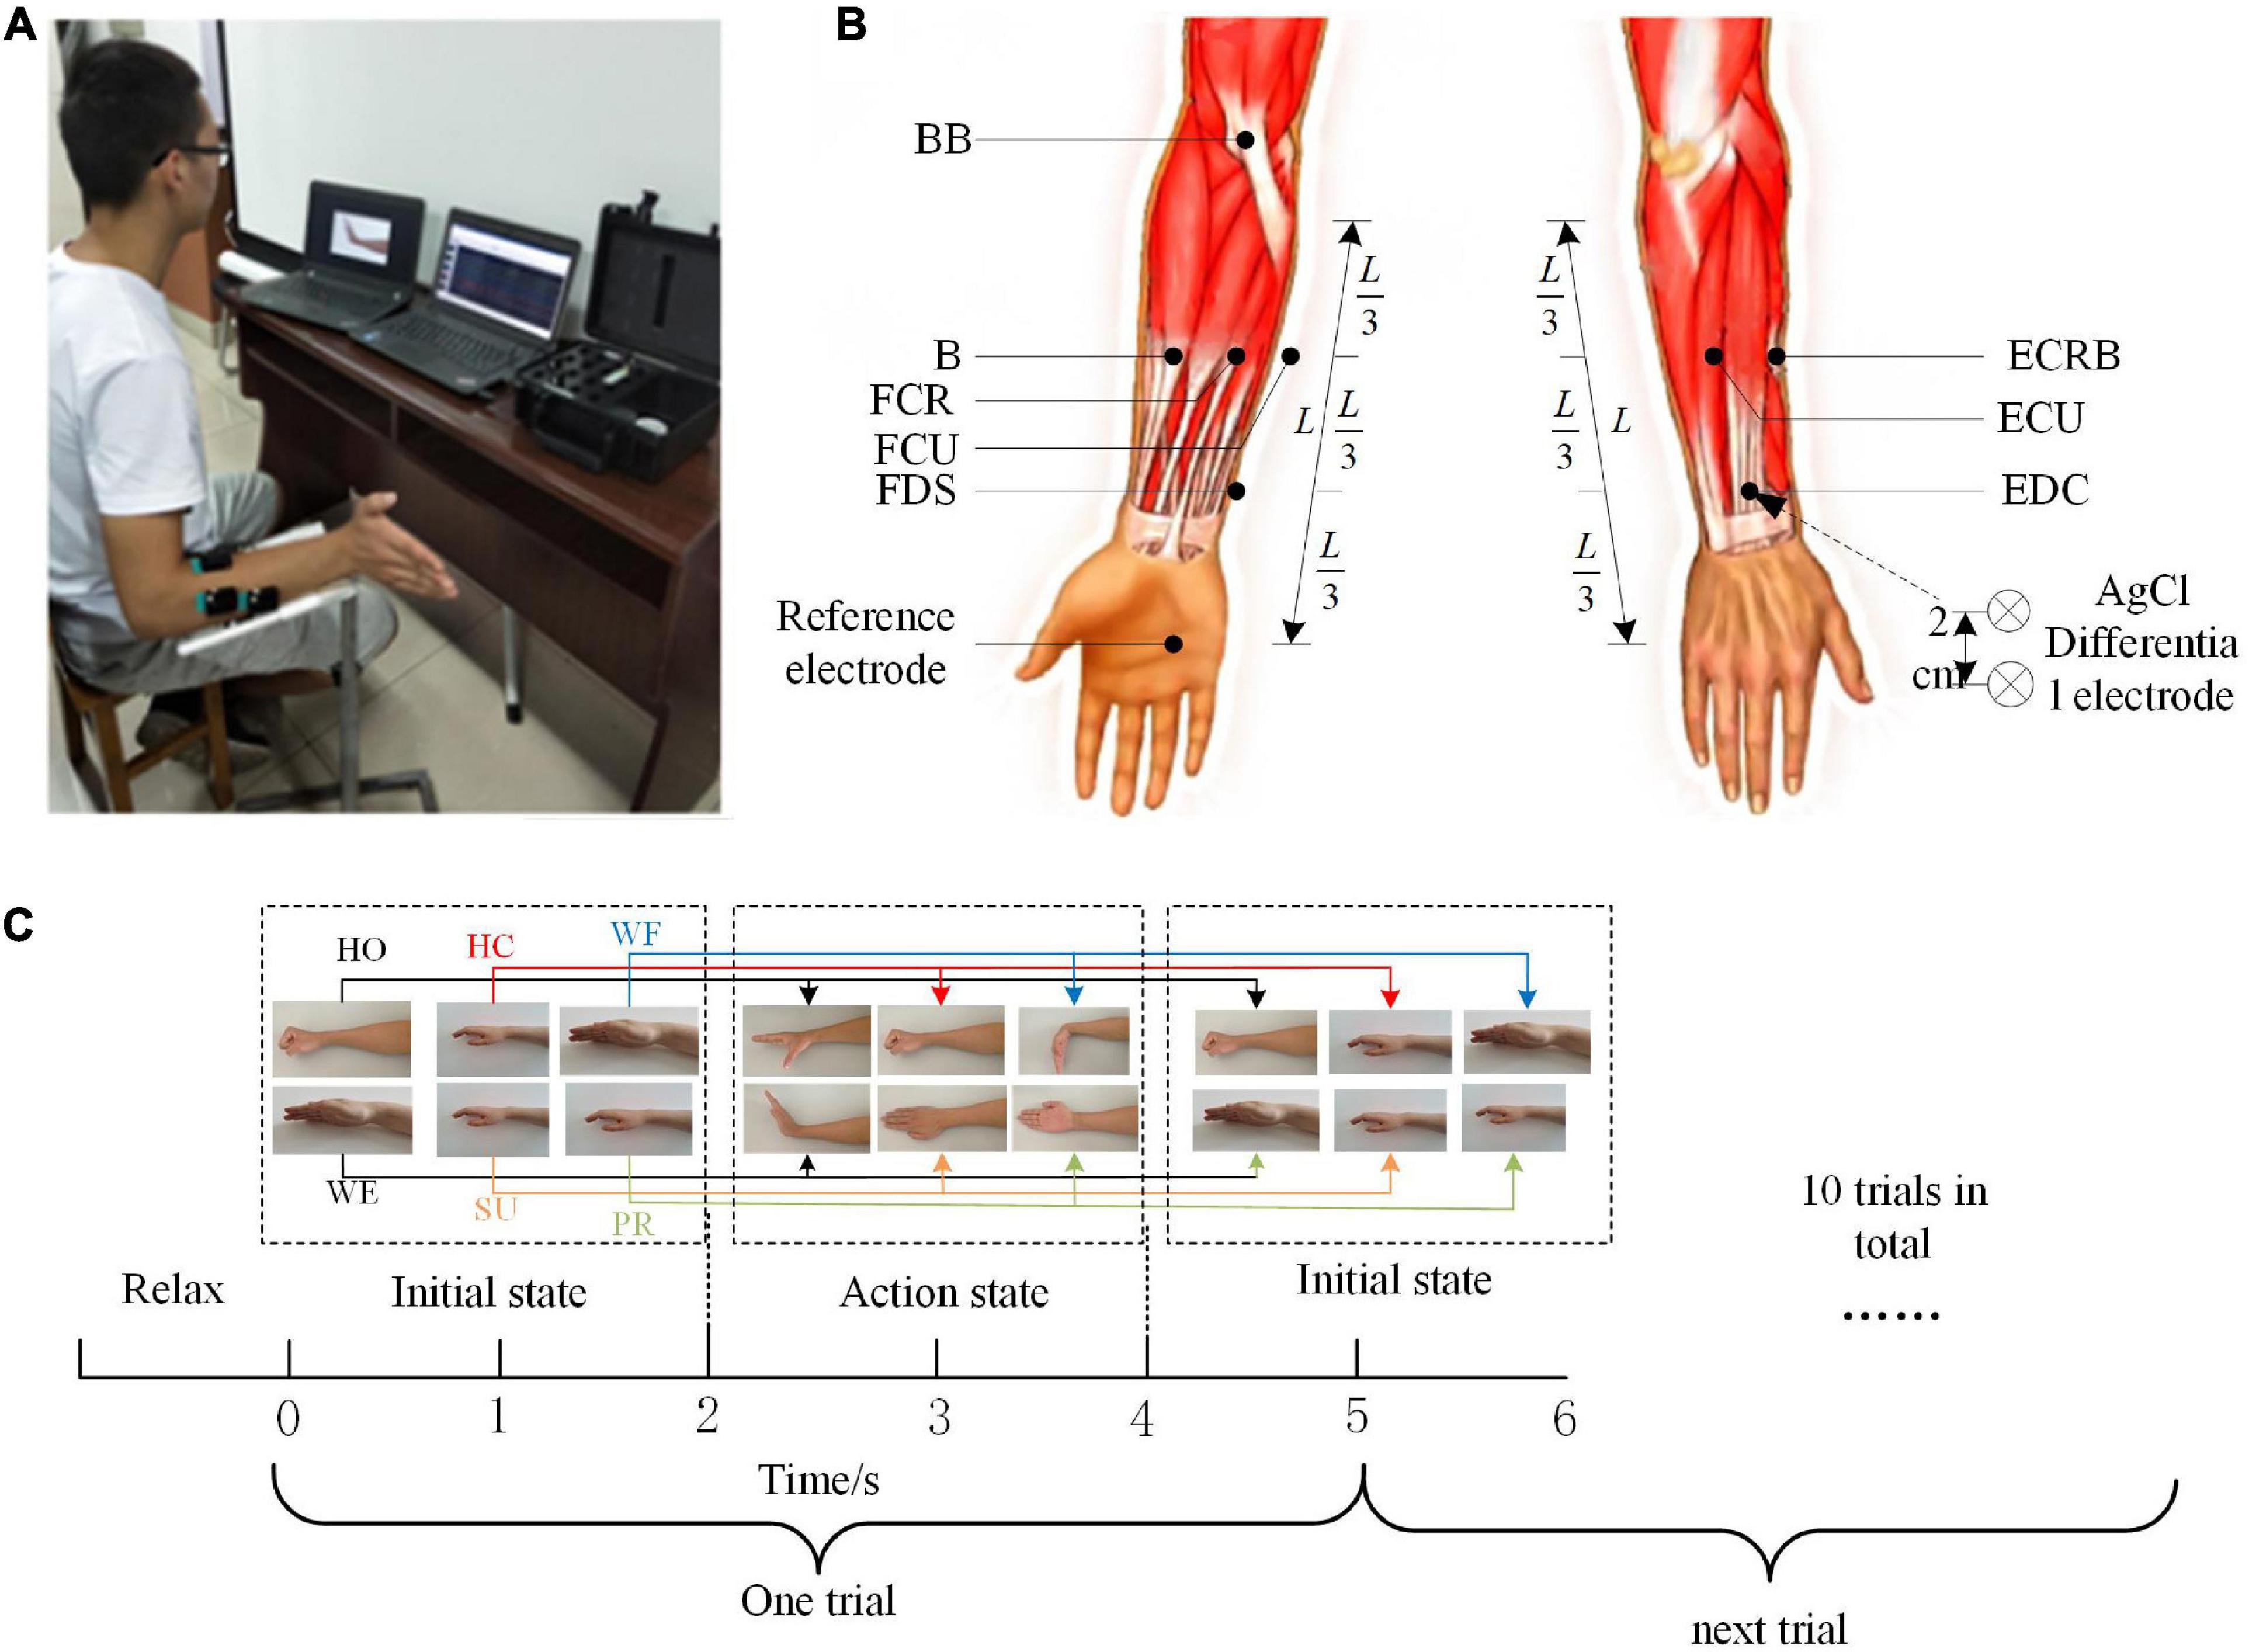 Muscle activation patterns and muscle synergies reflect different modes of coordination during upper extremity movement